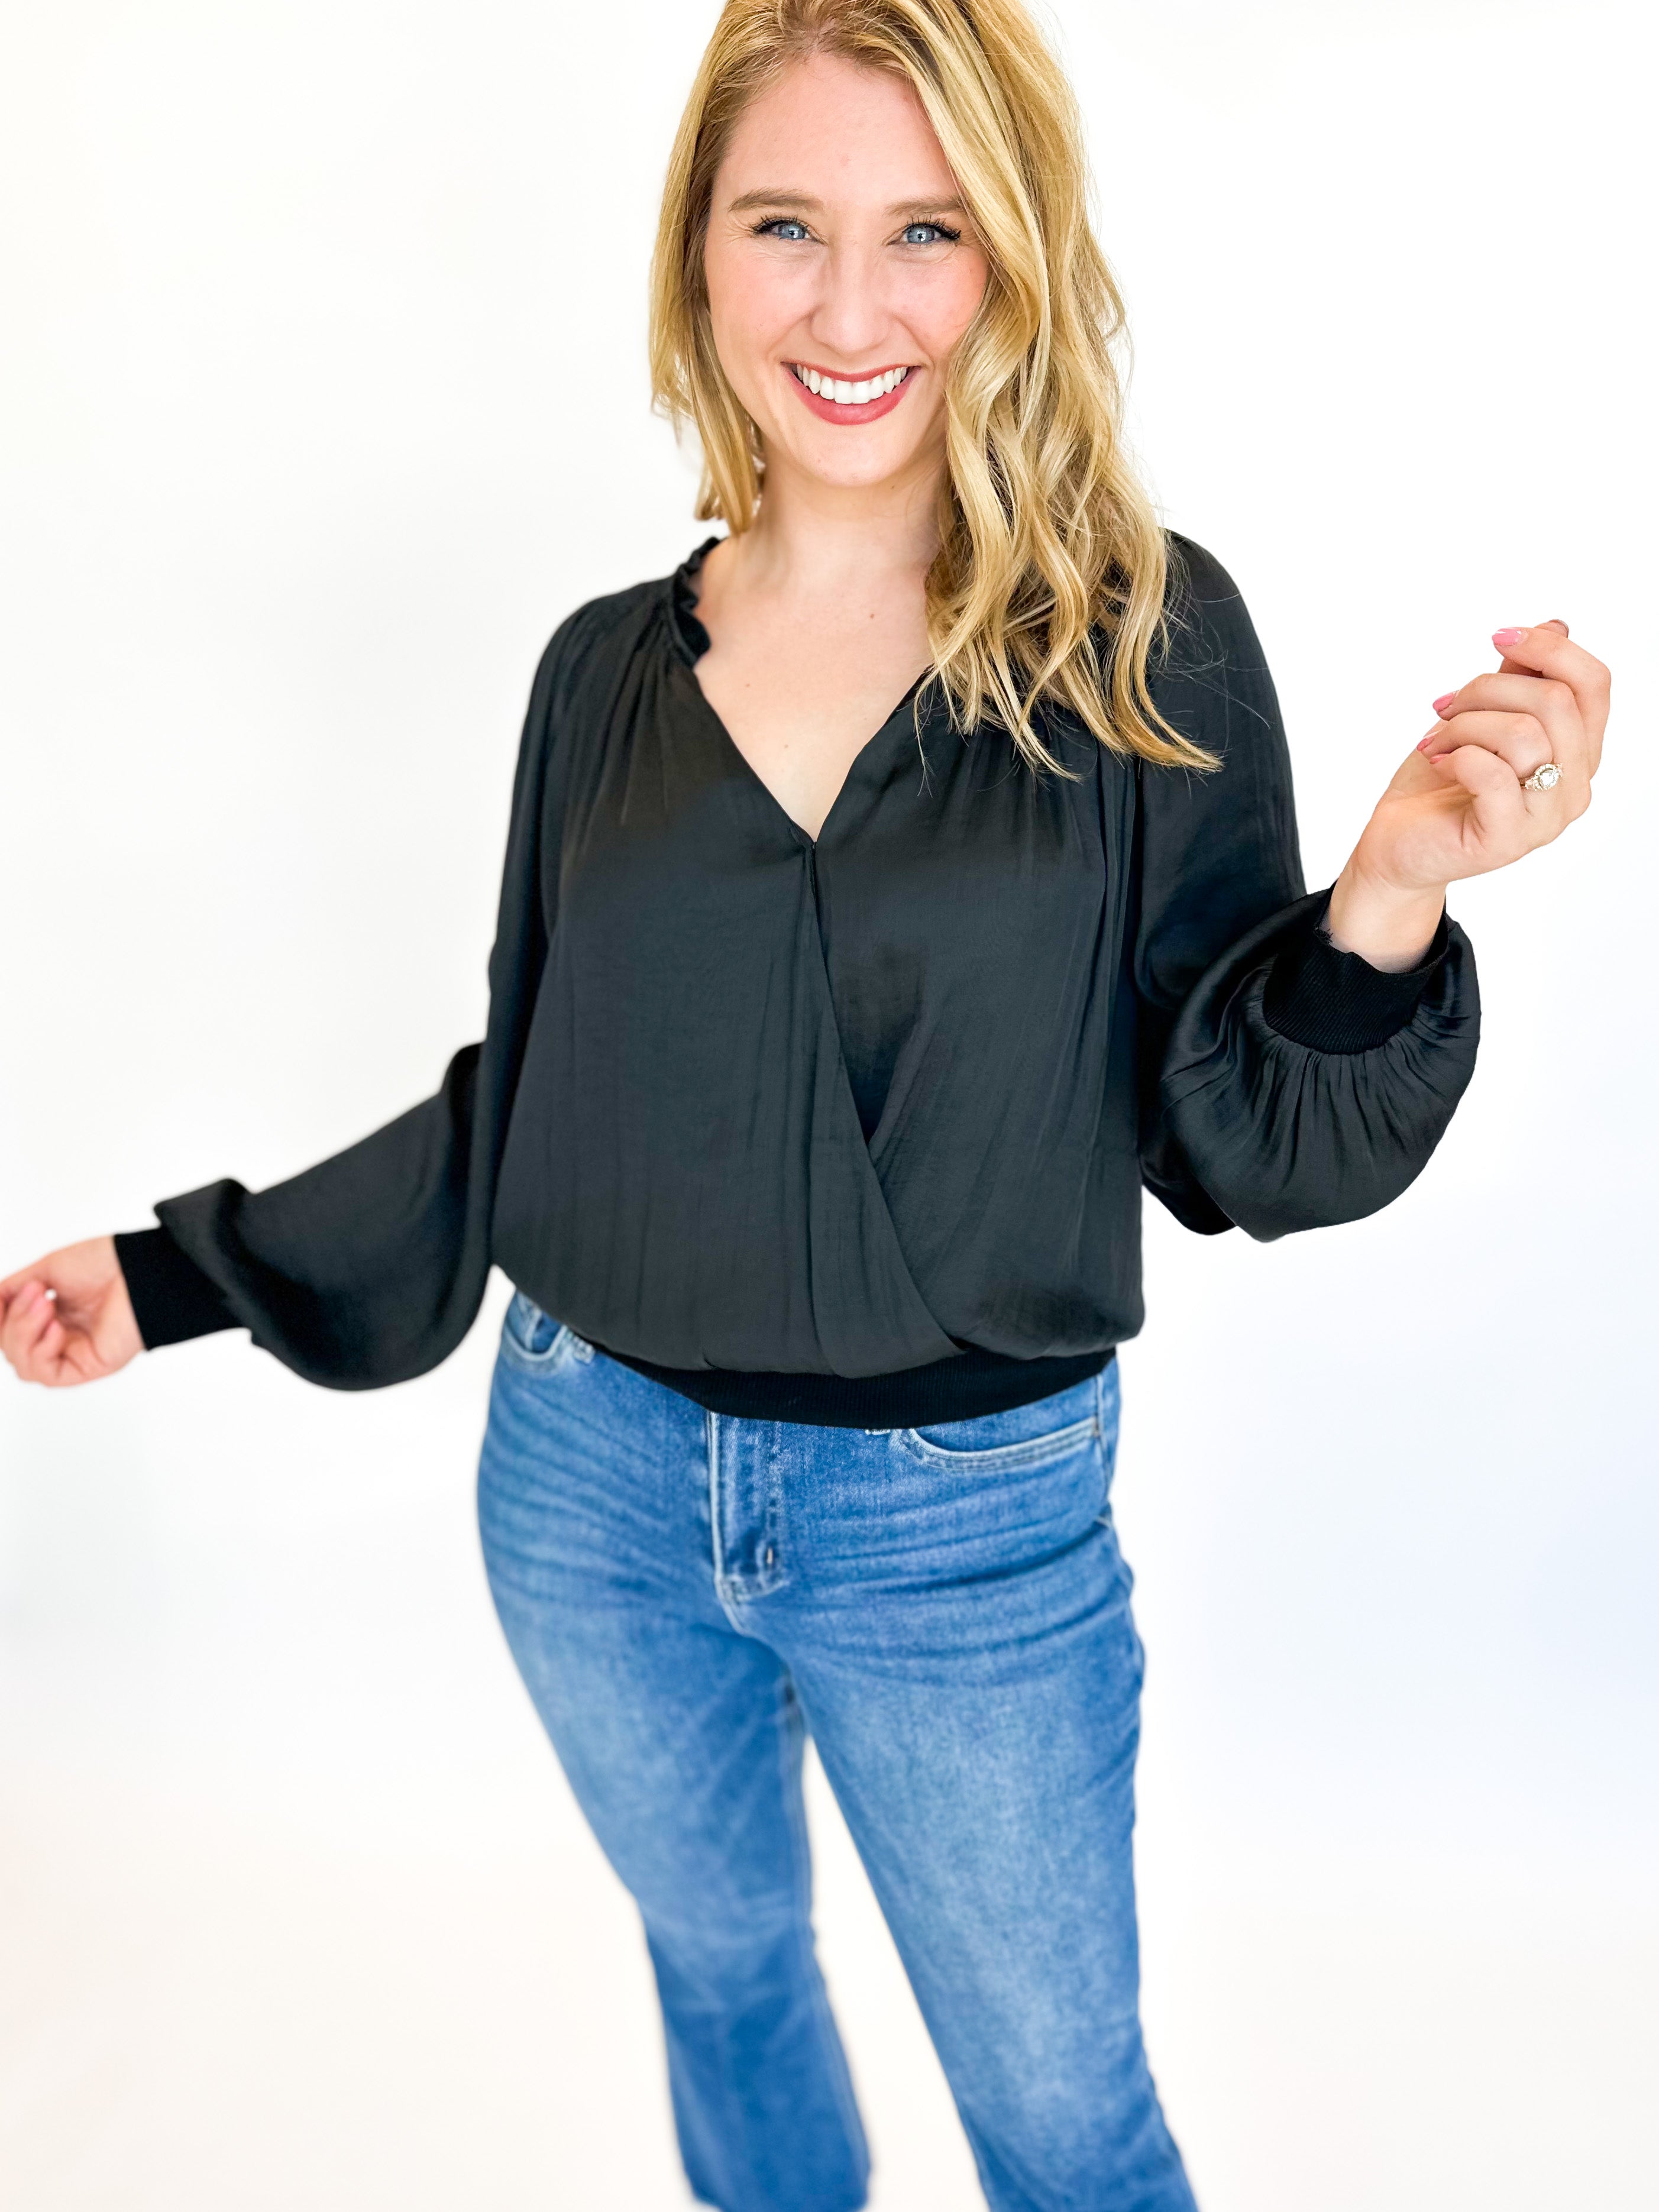 Classic Satin Blouse - Black-200 Fashion Blouses-CURRENT AIR CLOTHING-July & June Women's Fashion Boutique Located in San Antonio, Texas